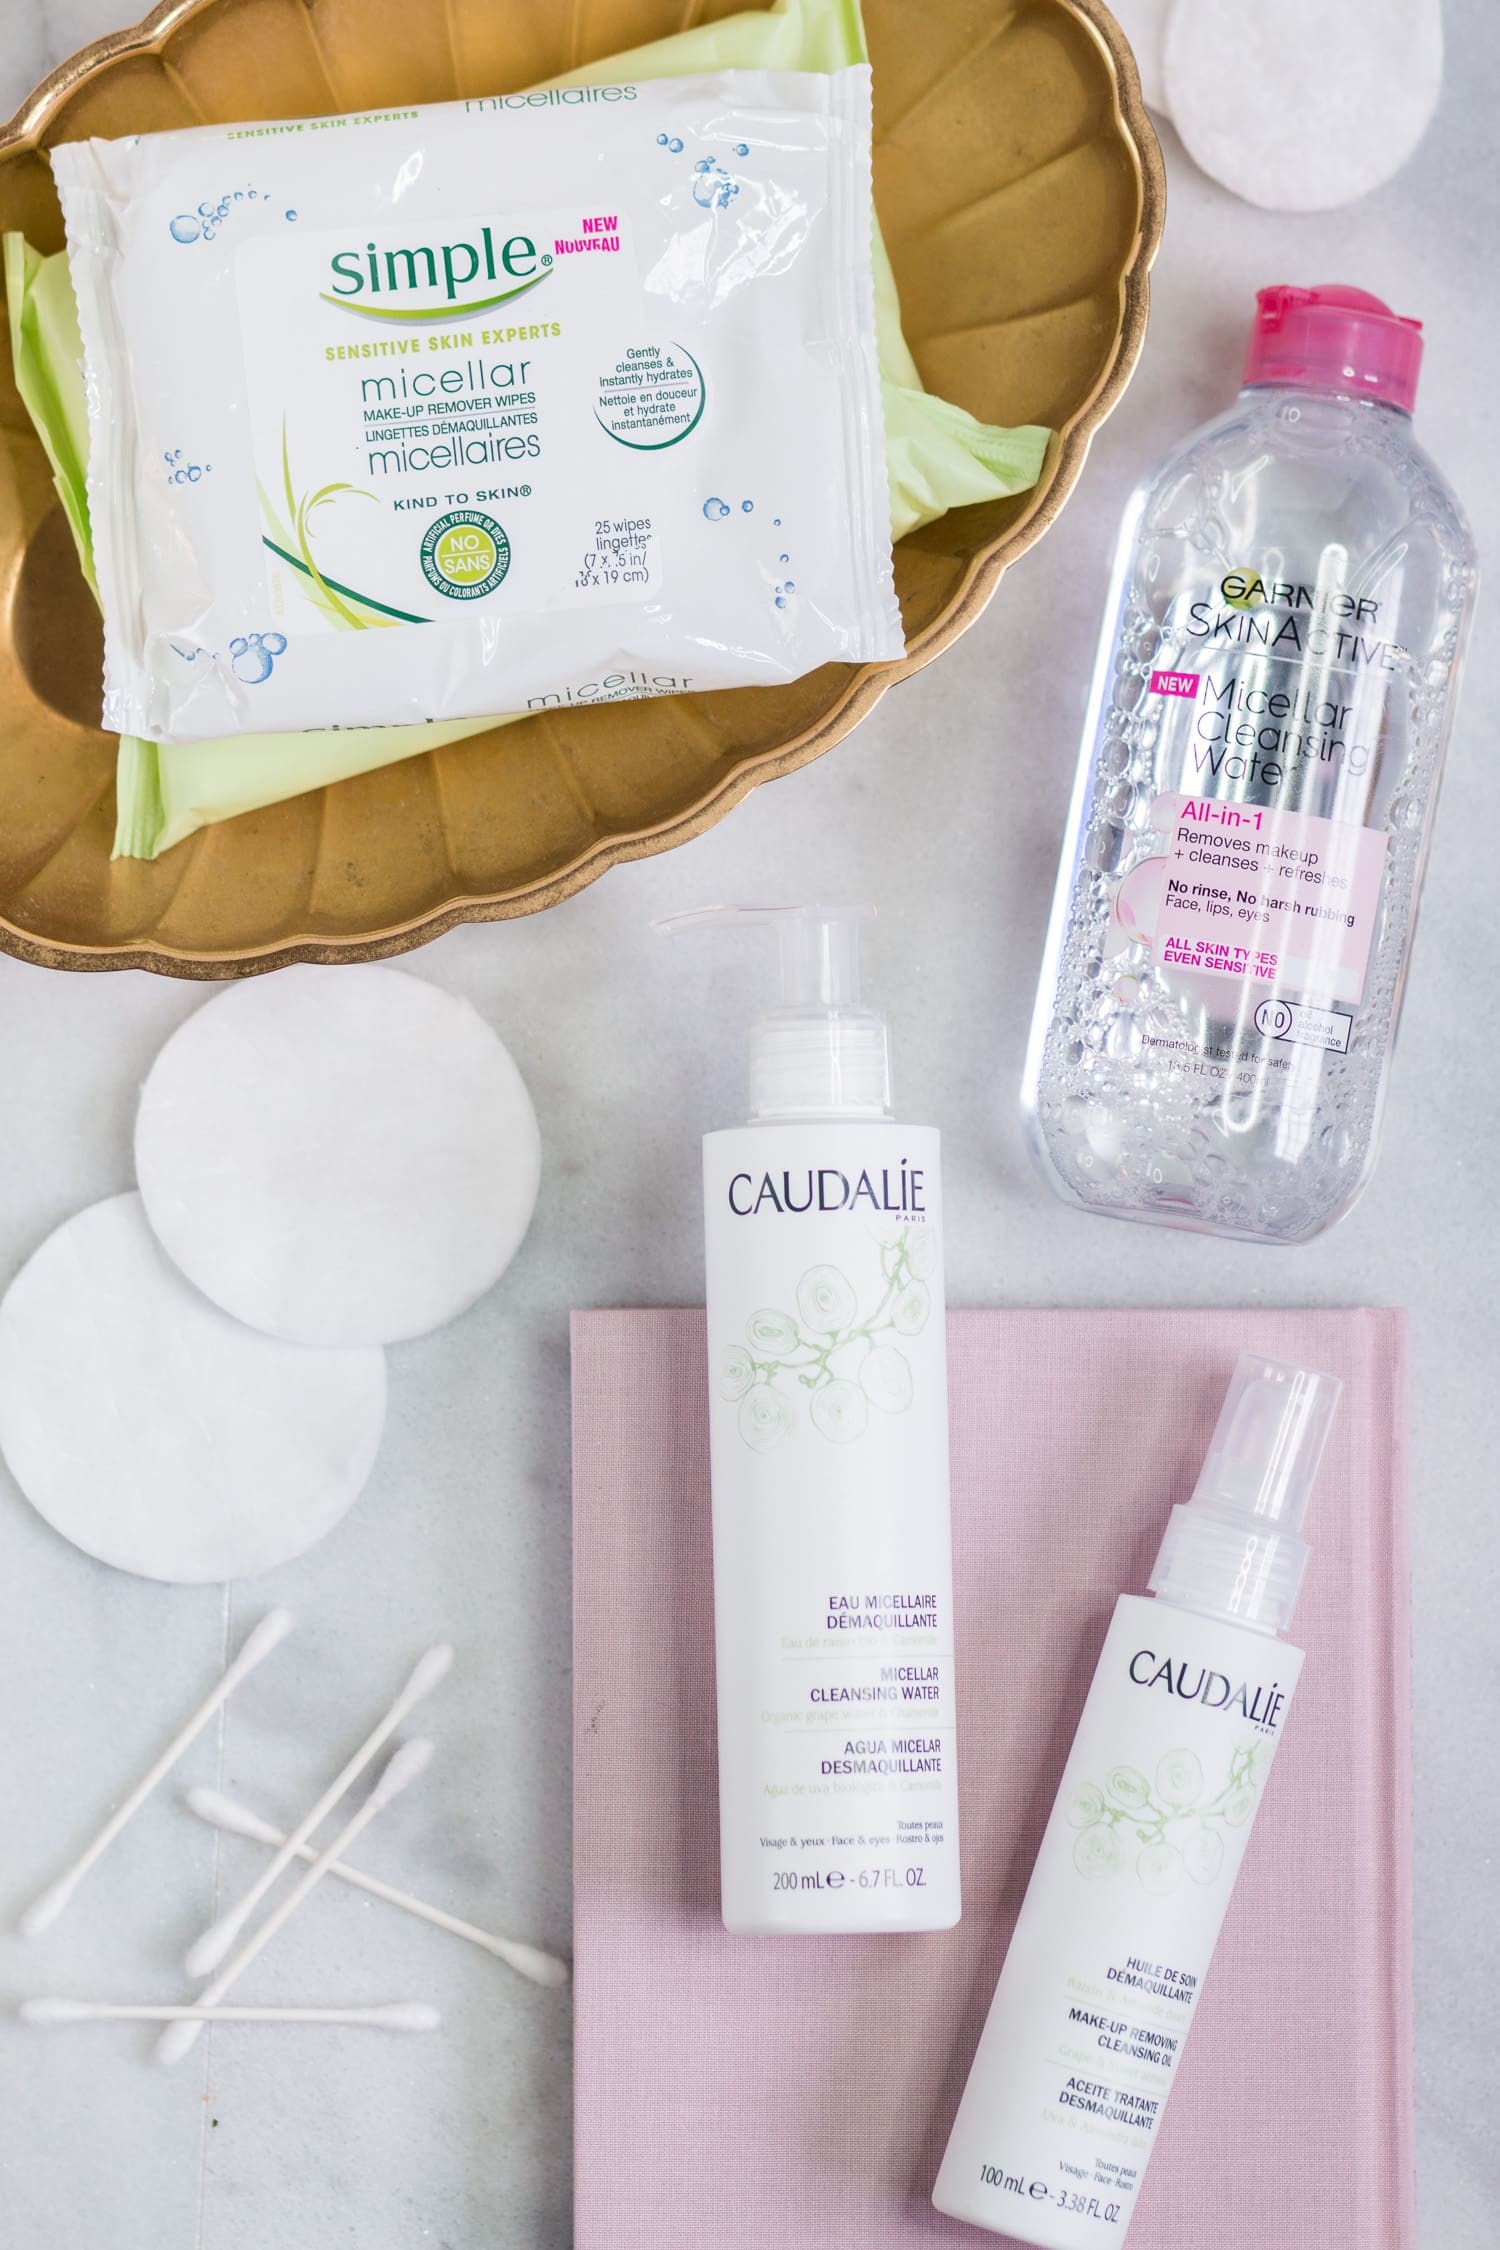 The best new skincare products for women in their 20s - including the best makeup removers + a review of Simple Micellar Make-Up Remover Wipes, Garnier SkinActive Micellar Cleansing Water & Makeup Remover, Caudalie Micellar Cleansing Water, and Caudalie Make-Up Removing Cleansing Oil by beauty blogger Ashley Brooke Nicholas